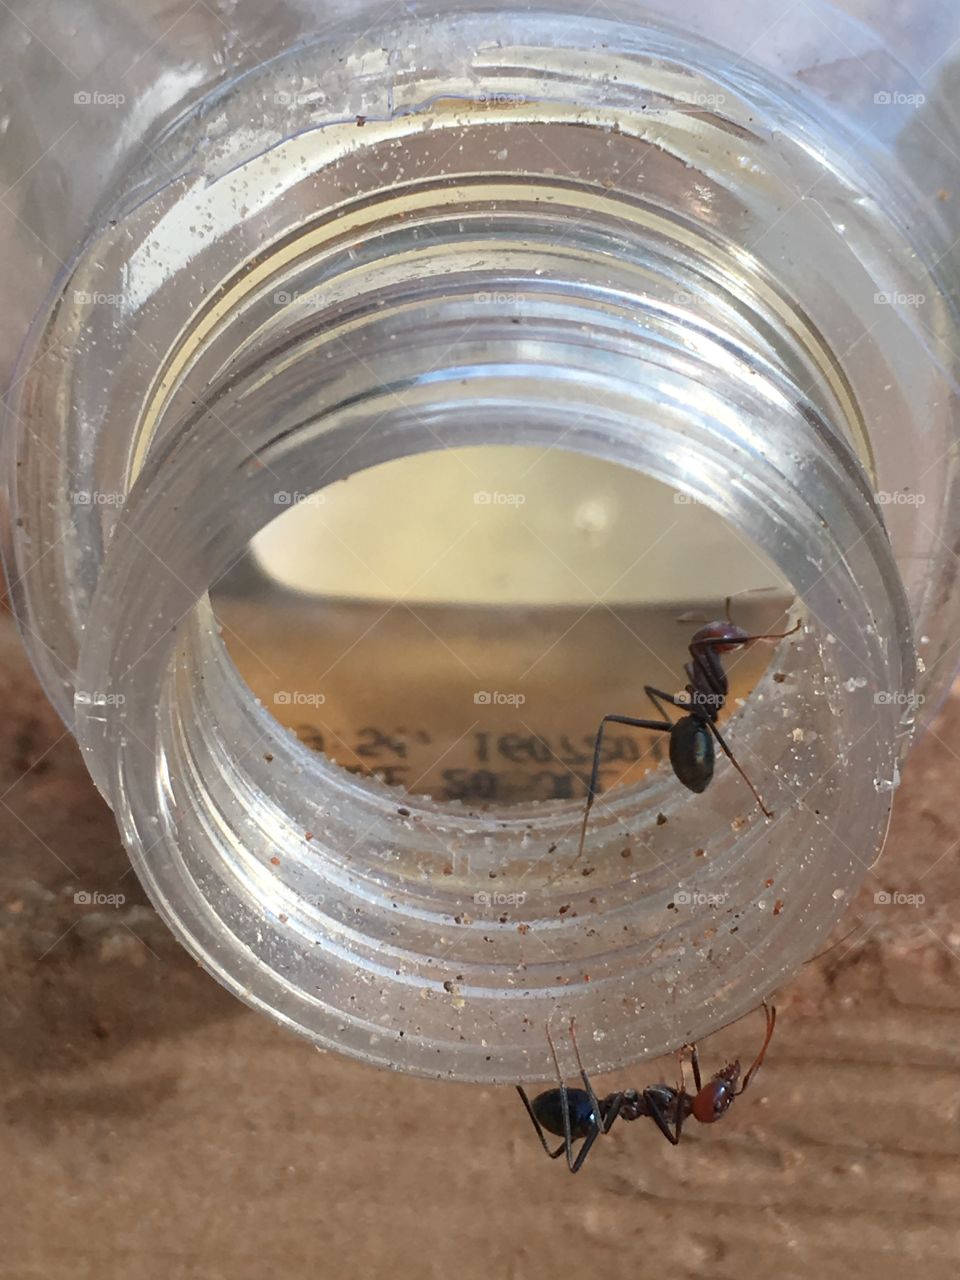 Australian worker ant crawling inside and outside glass jar laying on its side exploring for food